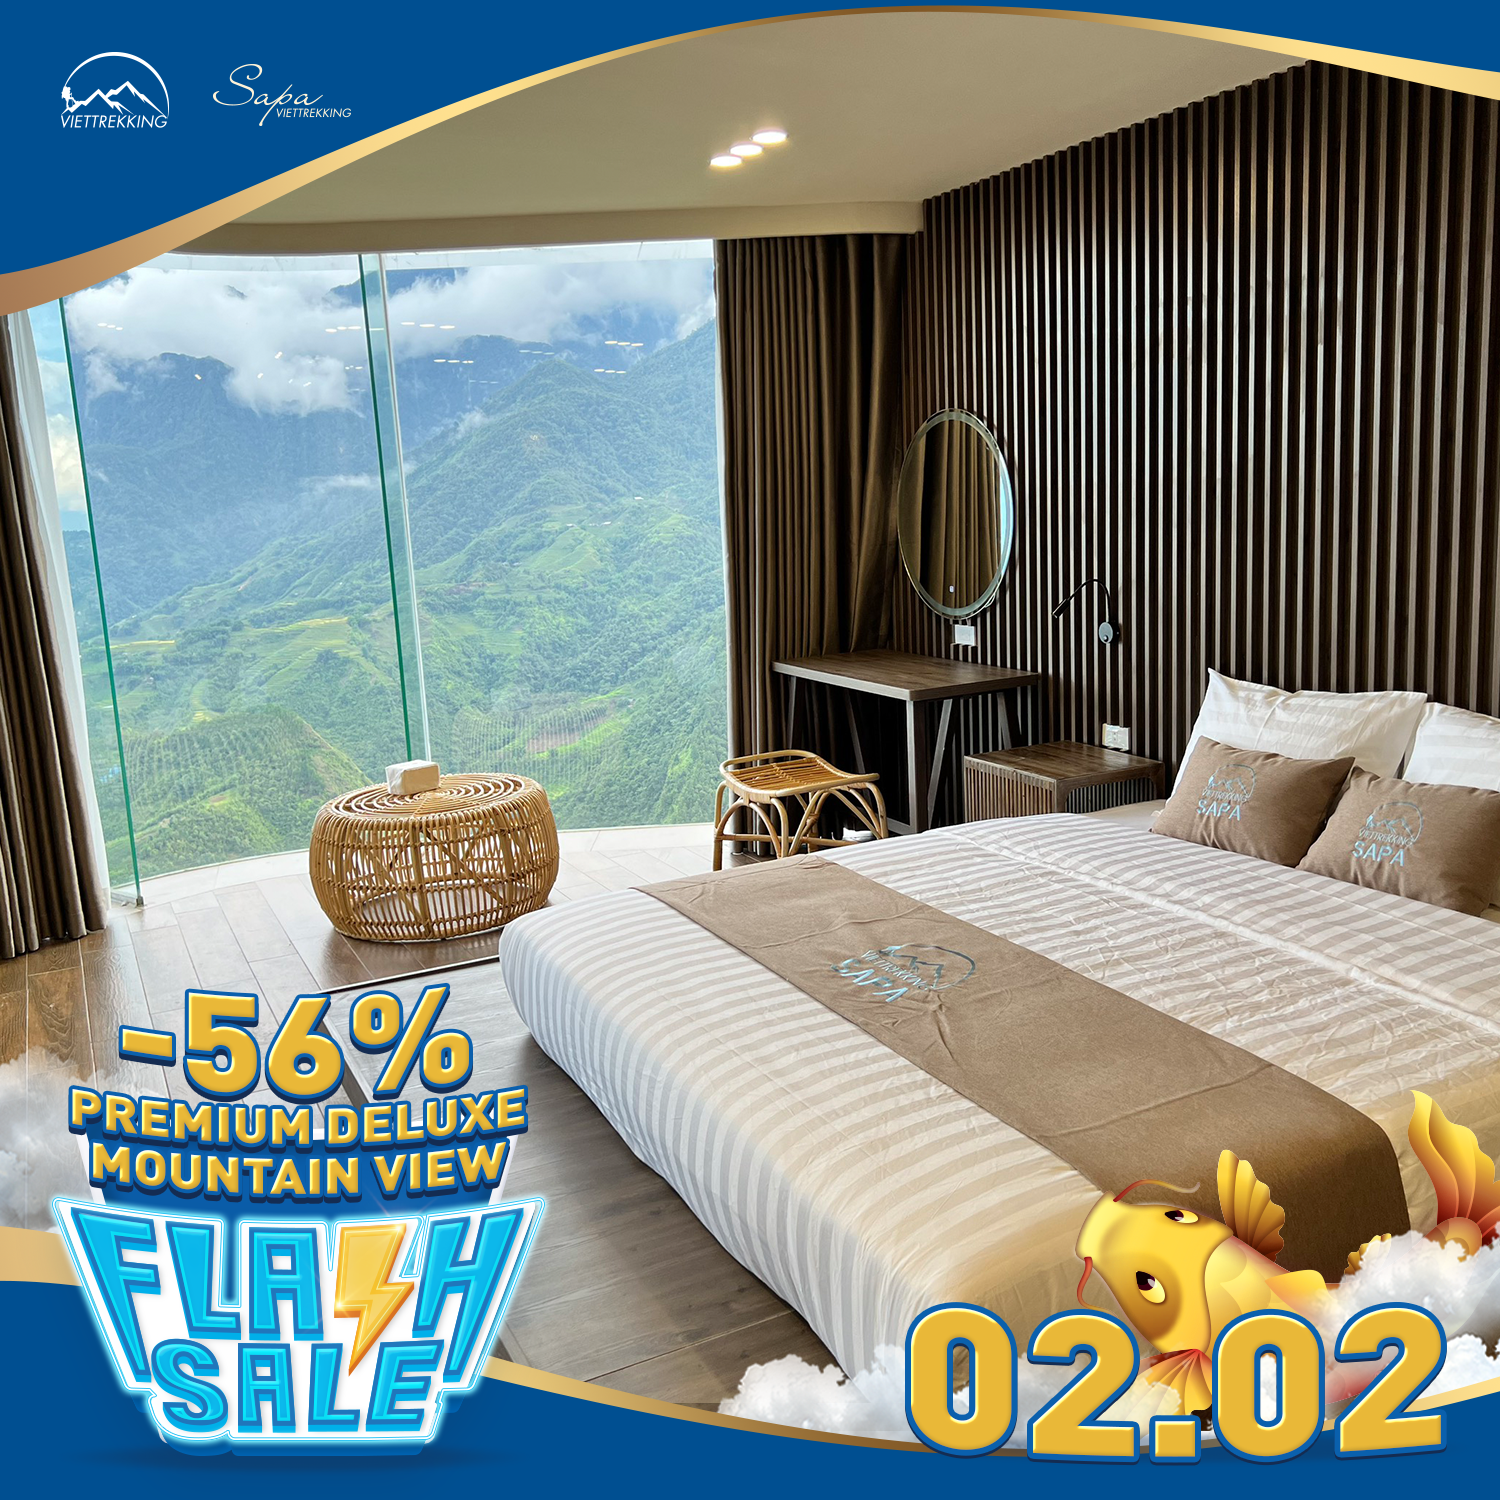 Voucher giảm 56% cho hạng phòng Premium Deluxe Mountain View